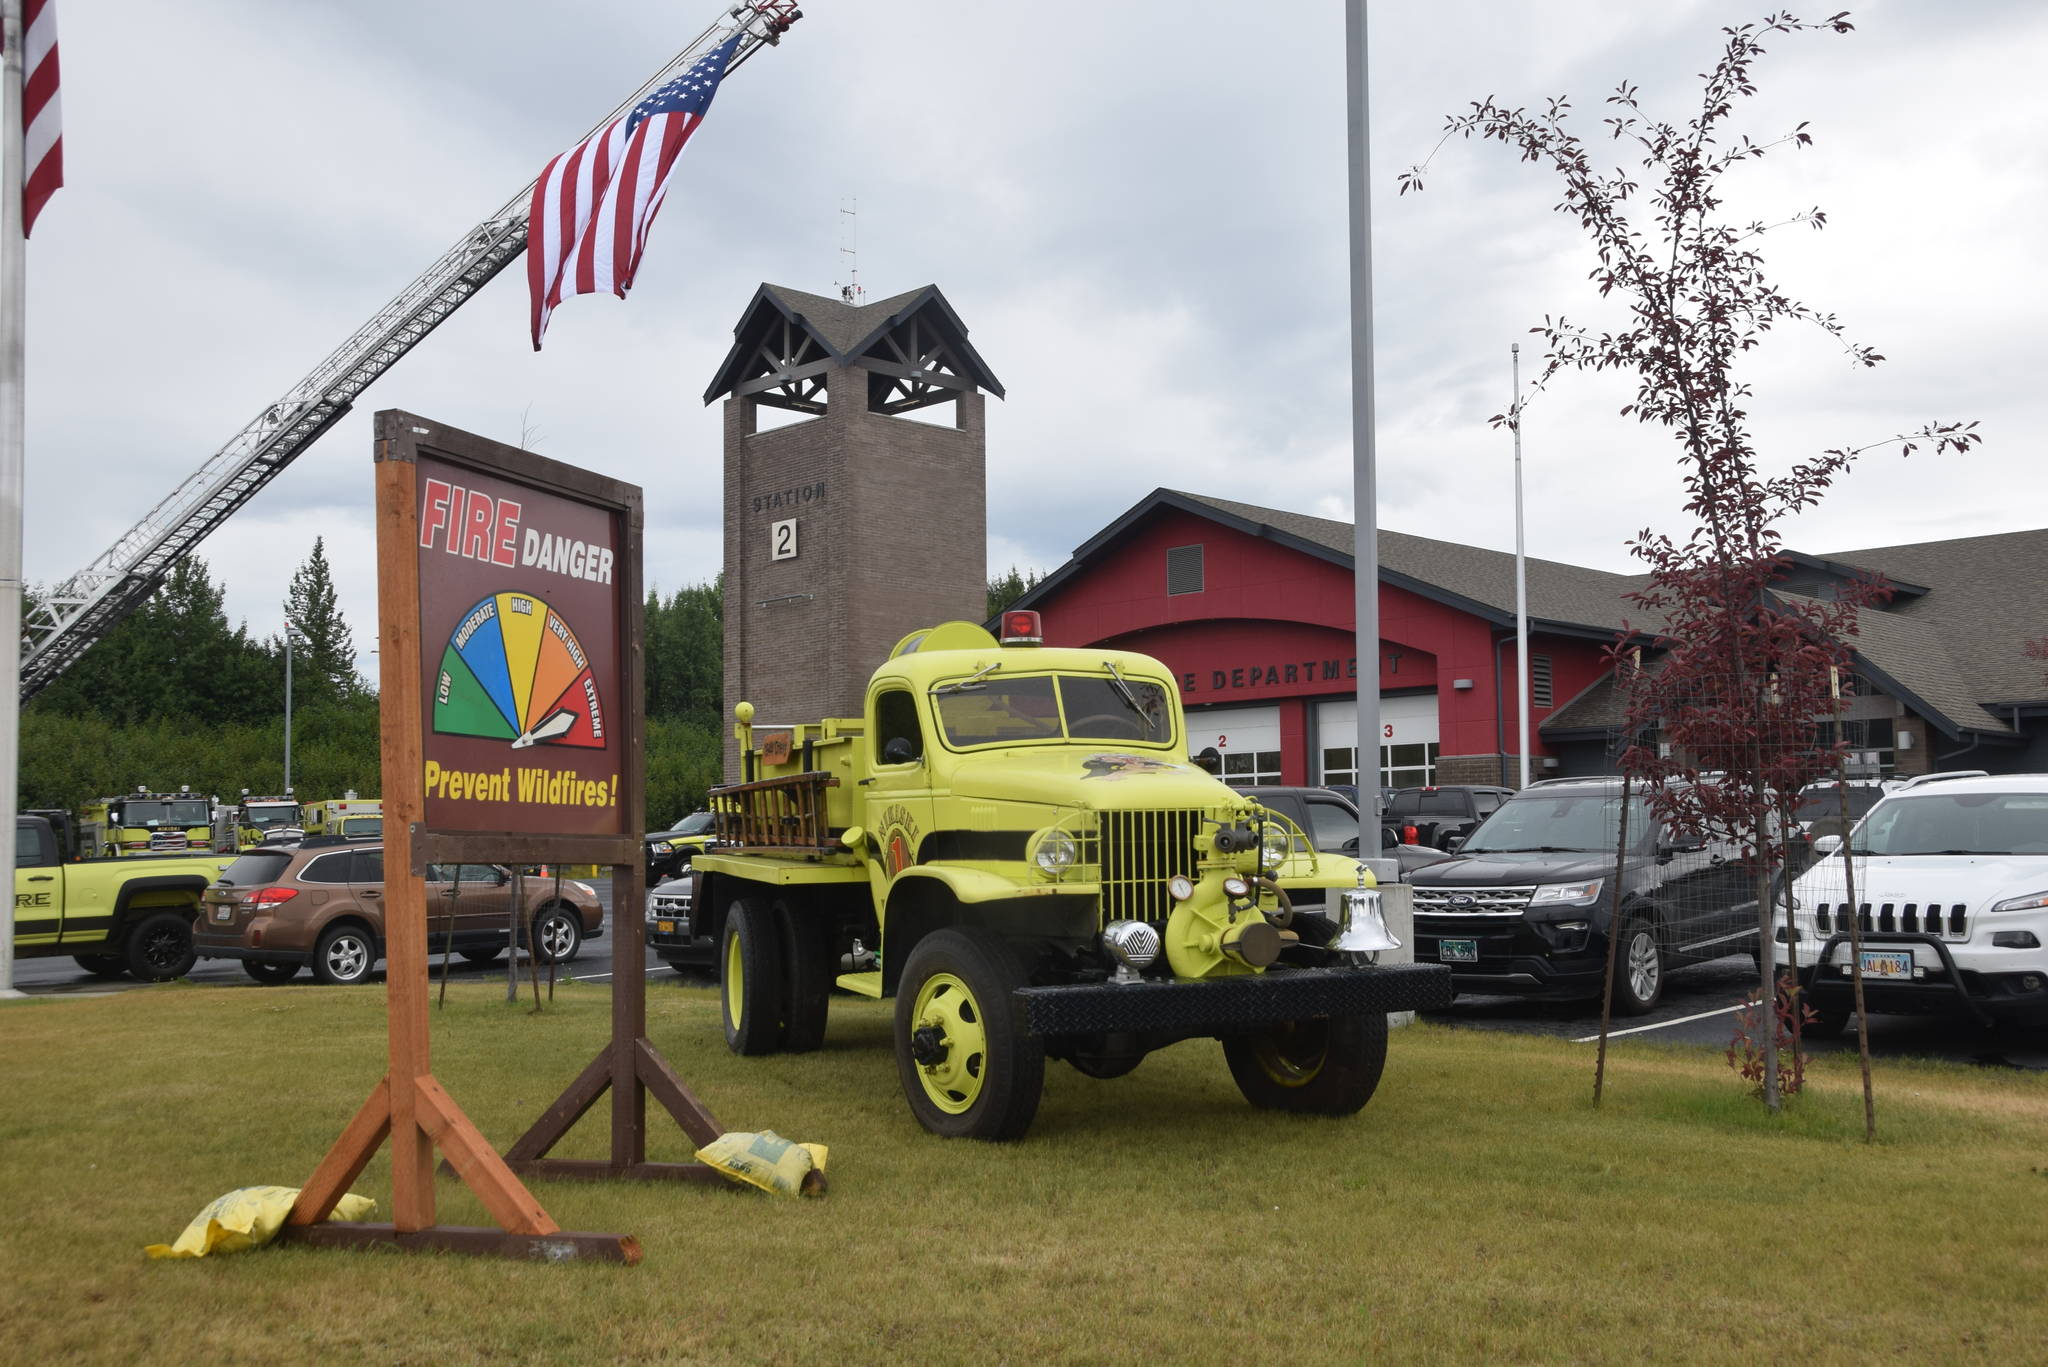 A 1944 Chevy, the Nikiski Fire Department’s first vehicle, sits outside of Fire Station #2 during the department’s 50th anniversary celebration in Nikiski, Alaska on July 15, 2019. (Photo by Brian Mazurek/Peninsula Clarion)